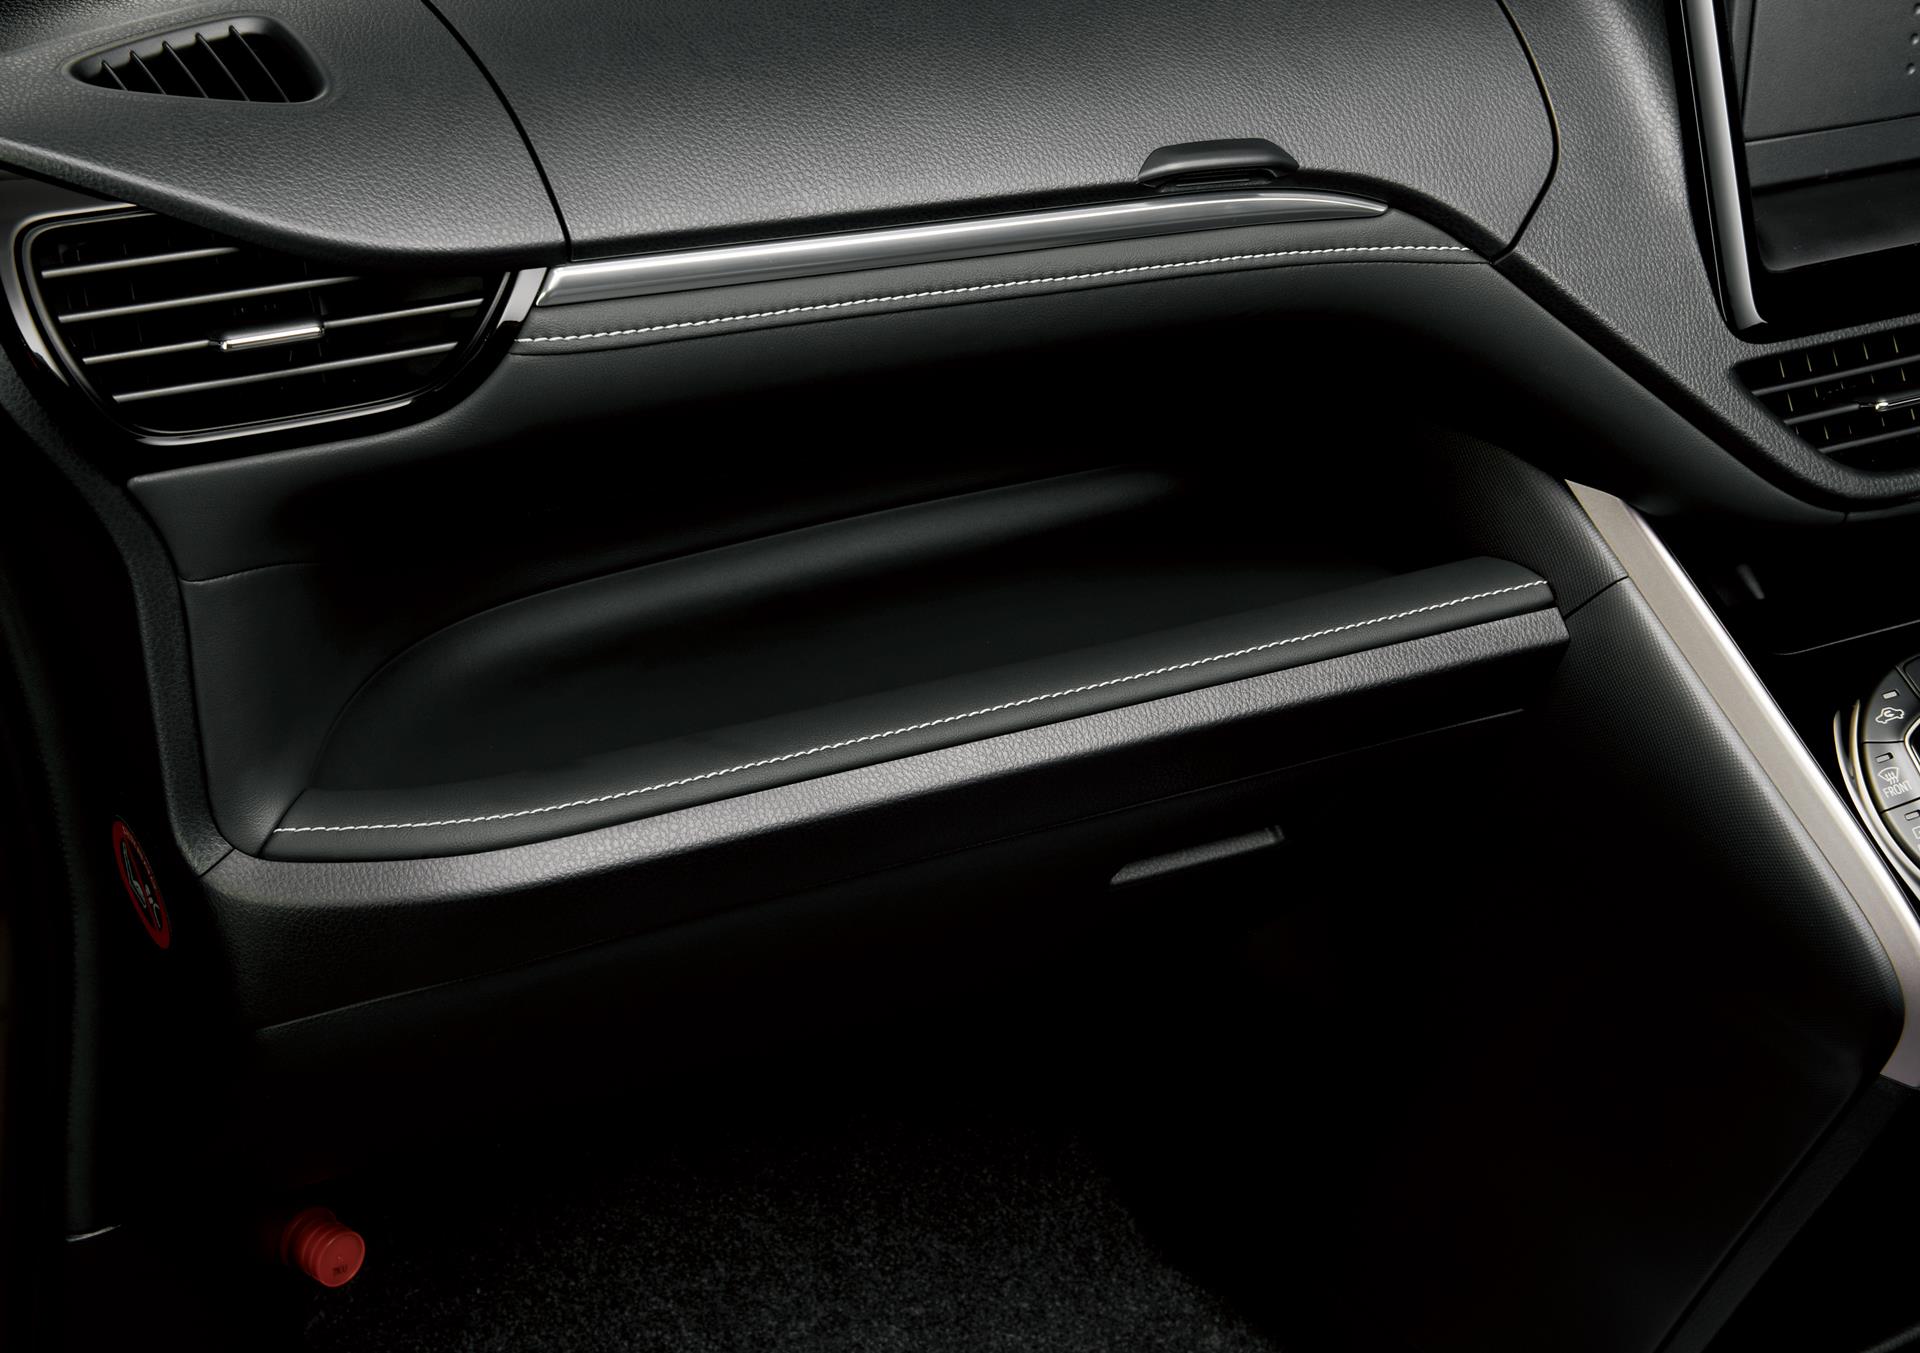 Large open tray on the passenger side (upholstered in synthetic leather)